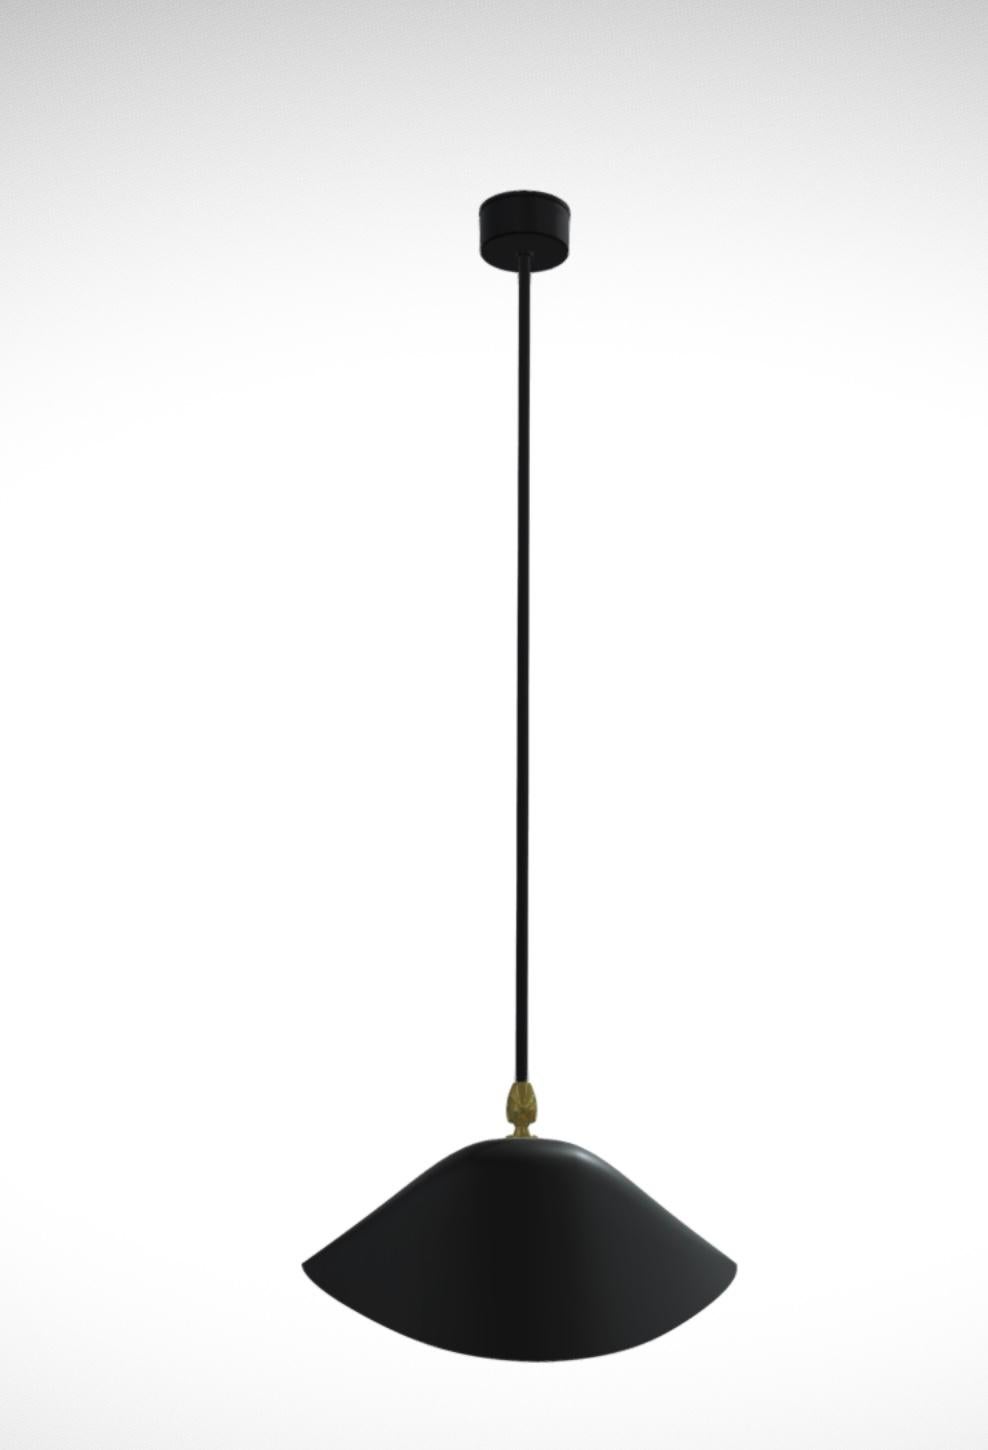 Painted Serge Mouille 'Bibliothèque' Ceiling Lamp in Black For Sale